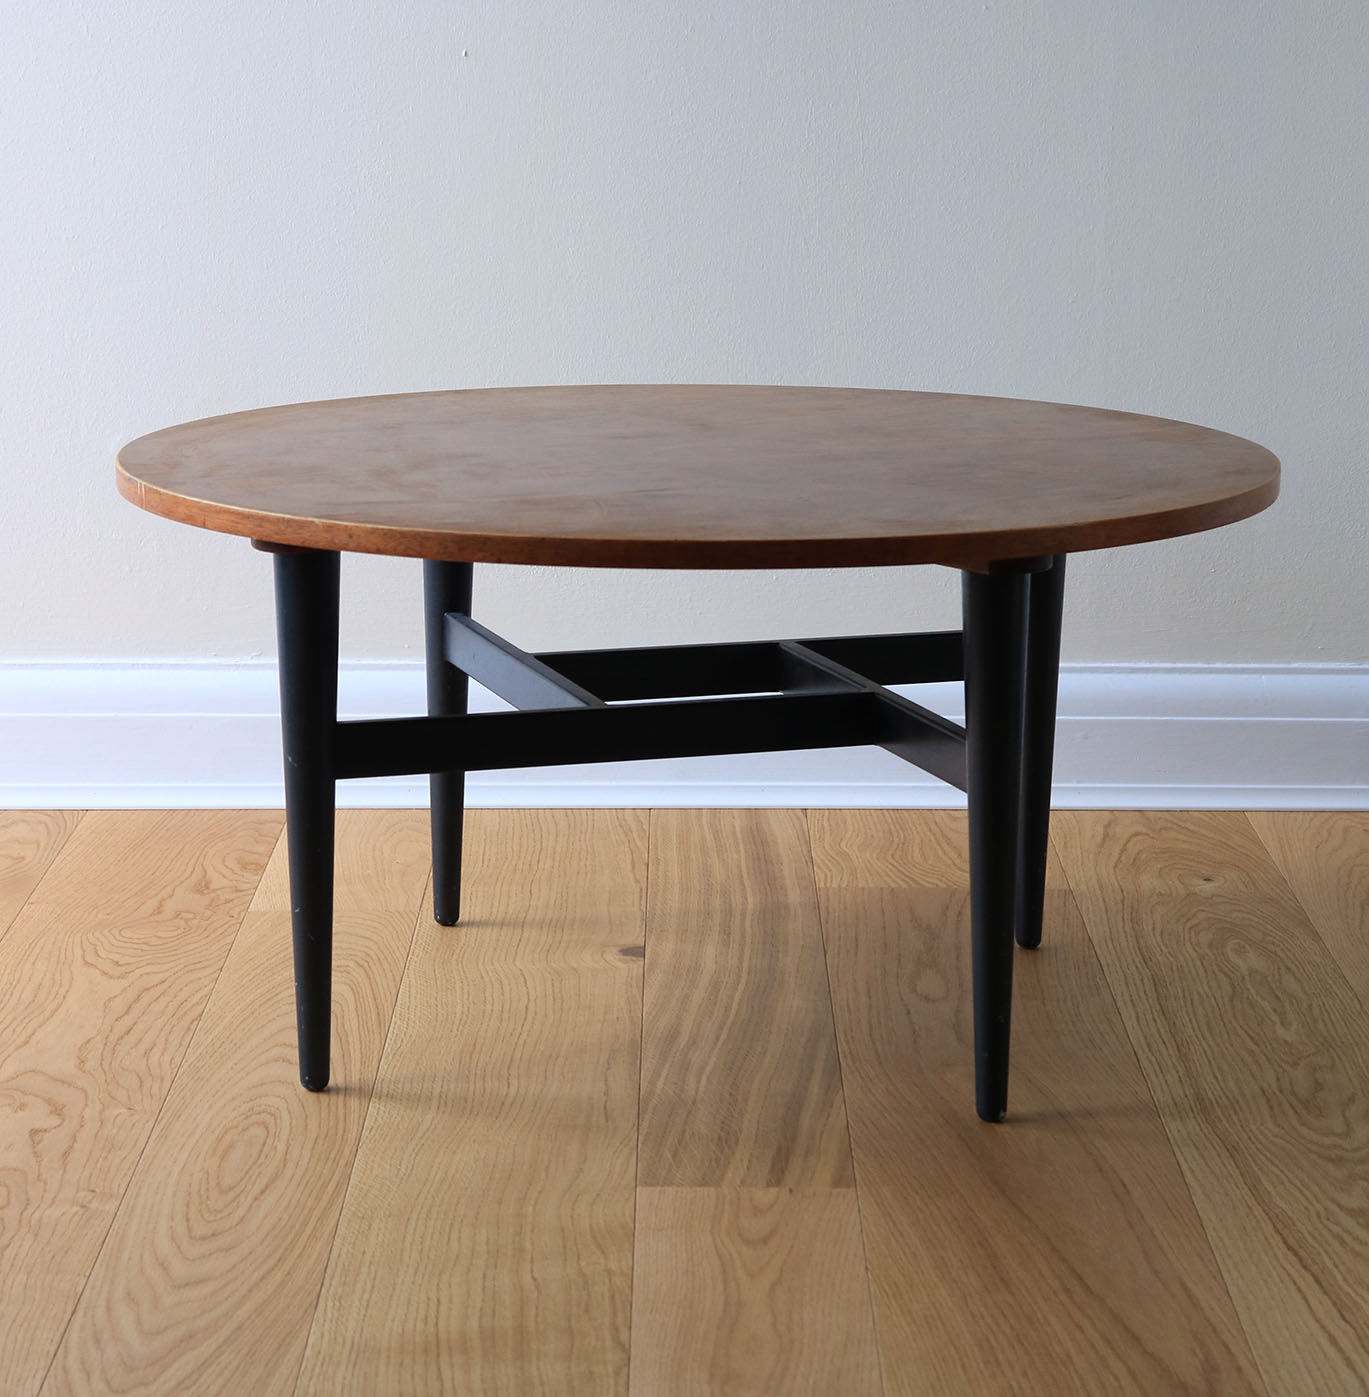 A vintage Gordon Russell coffee table, circa 1960s